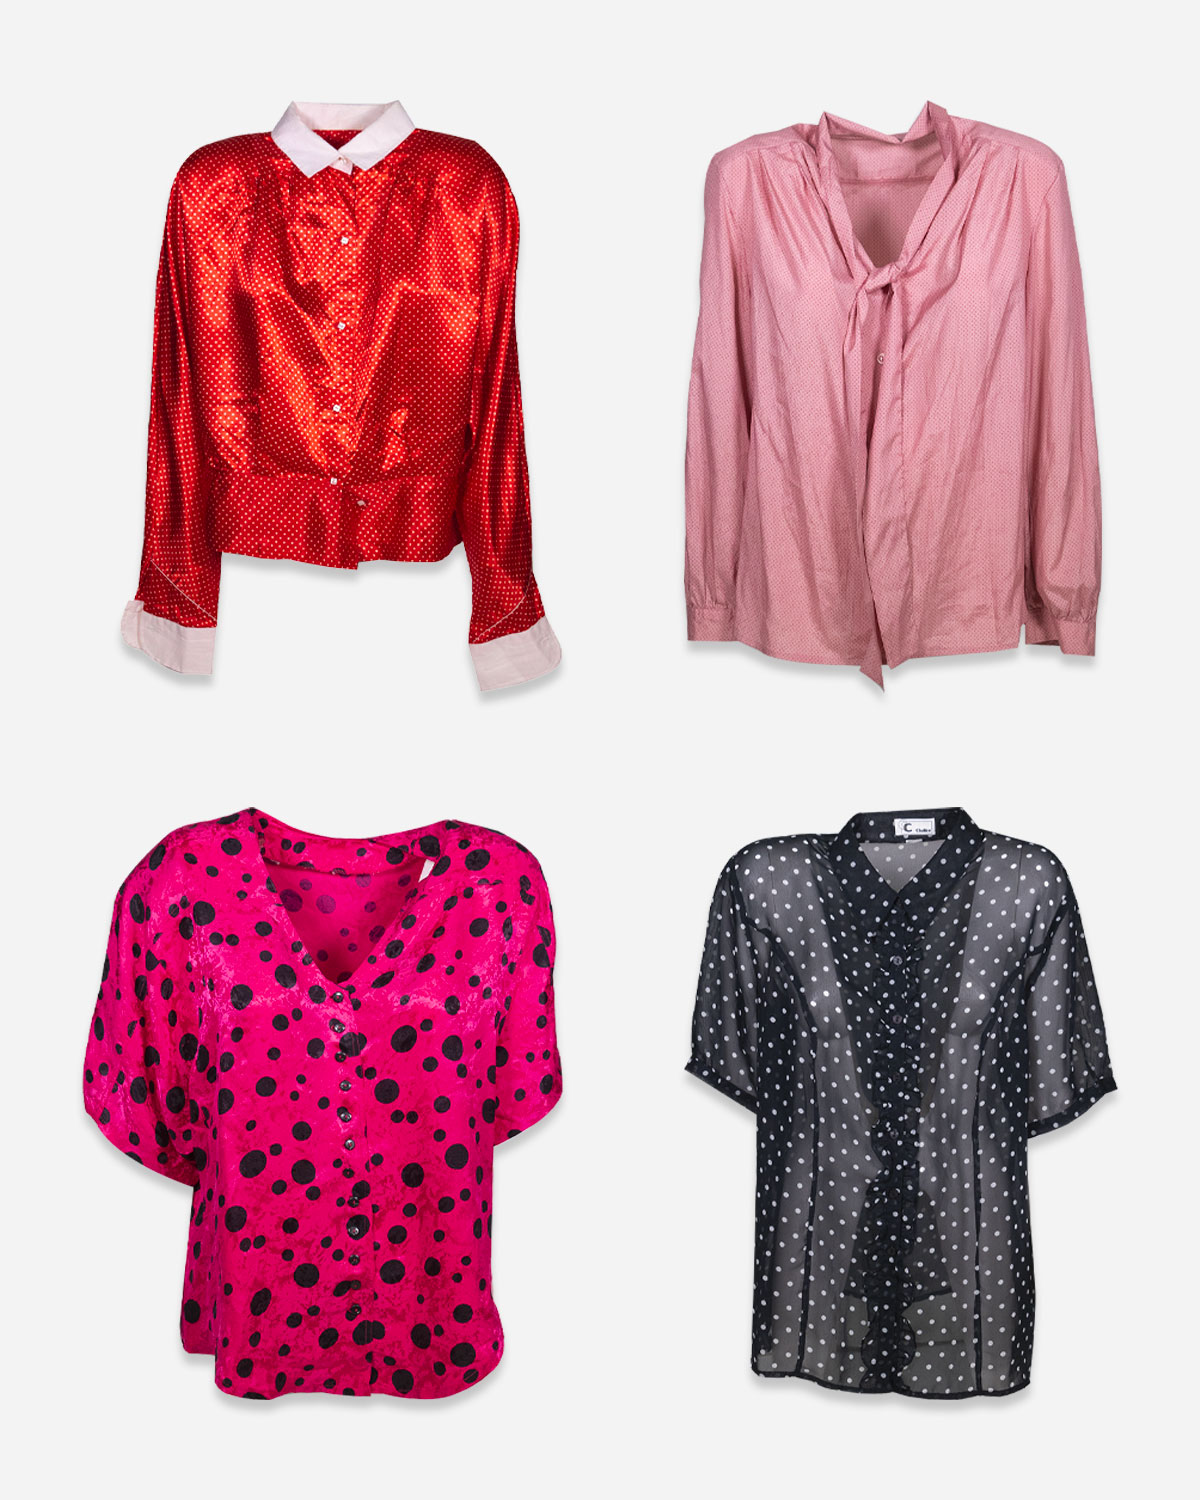 Women's shirts with polka dot pattern: 4 pieces